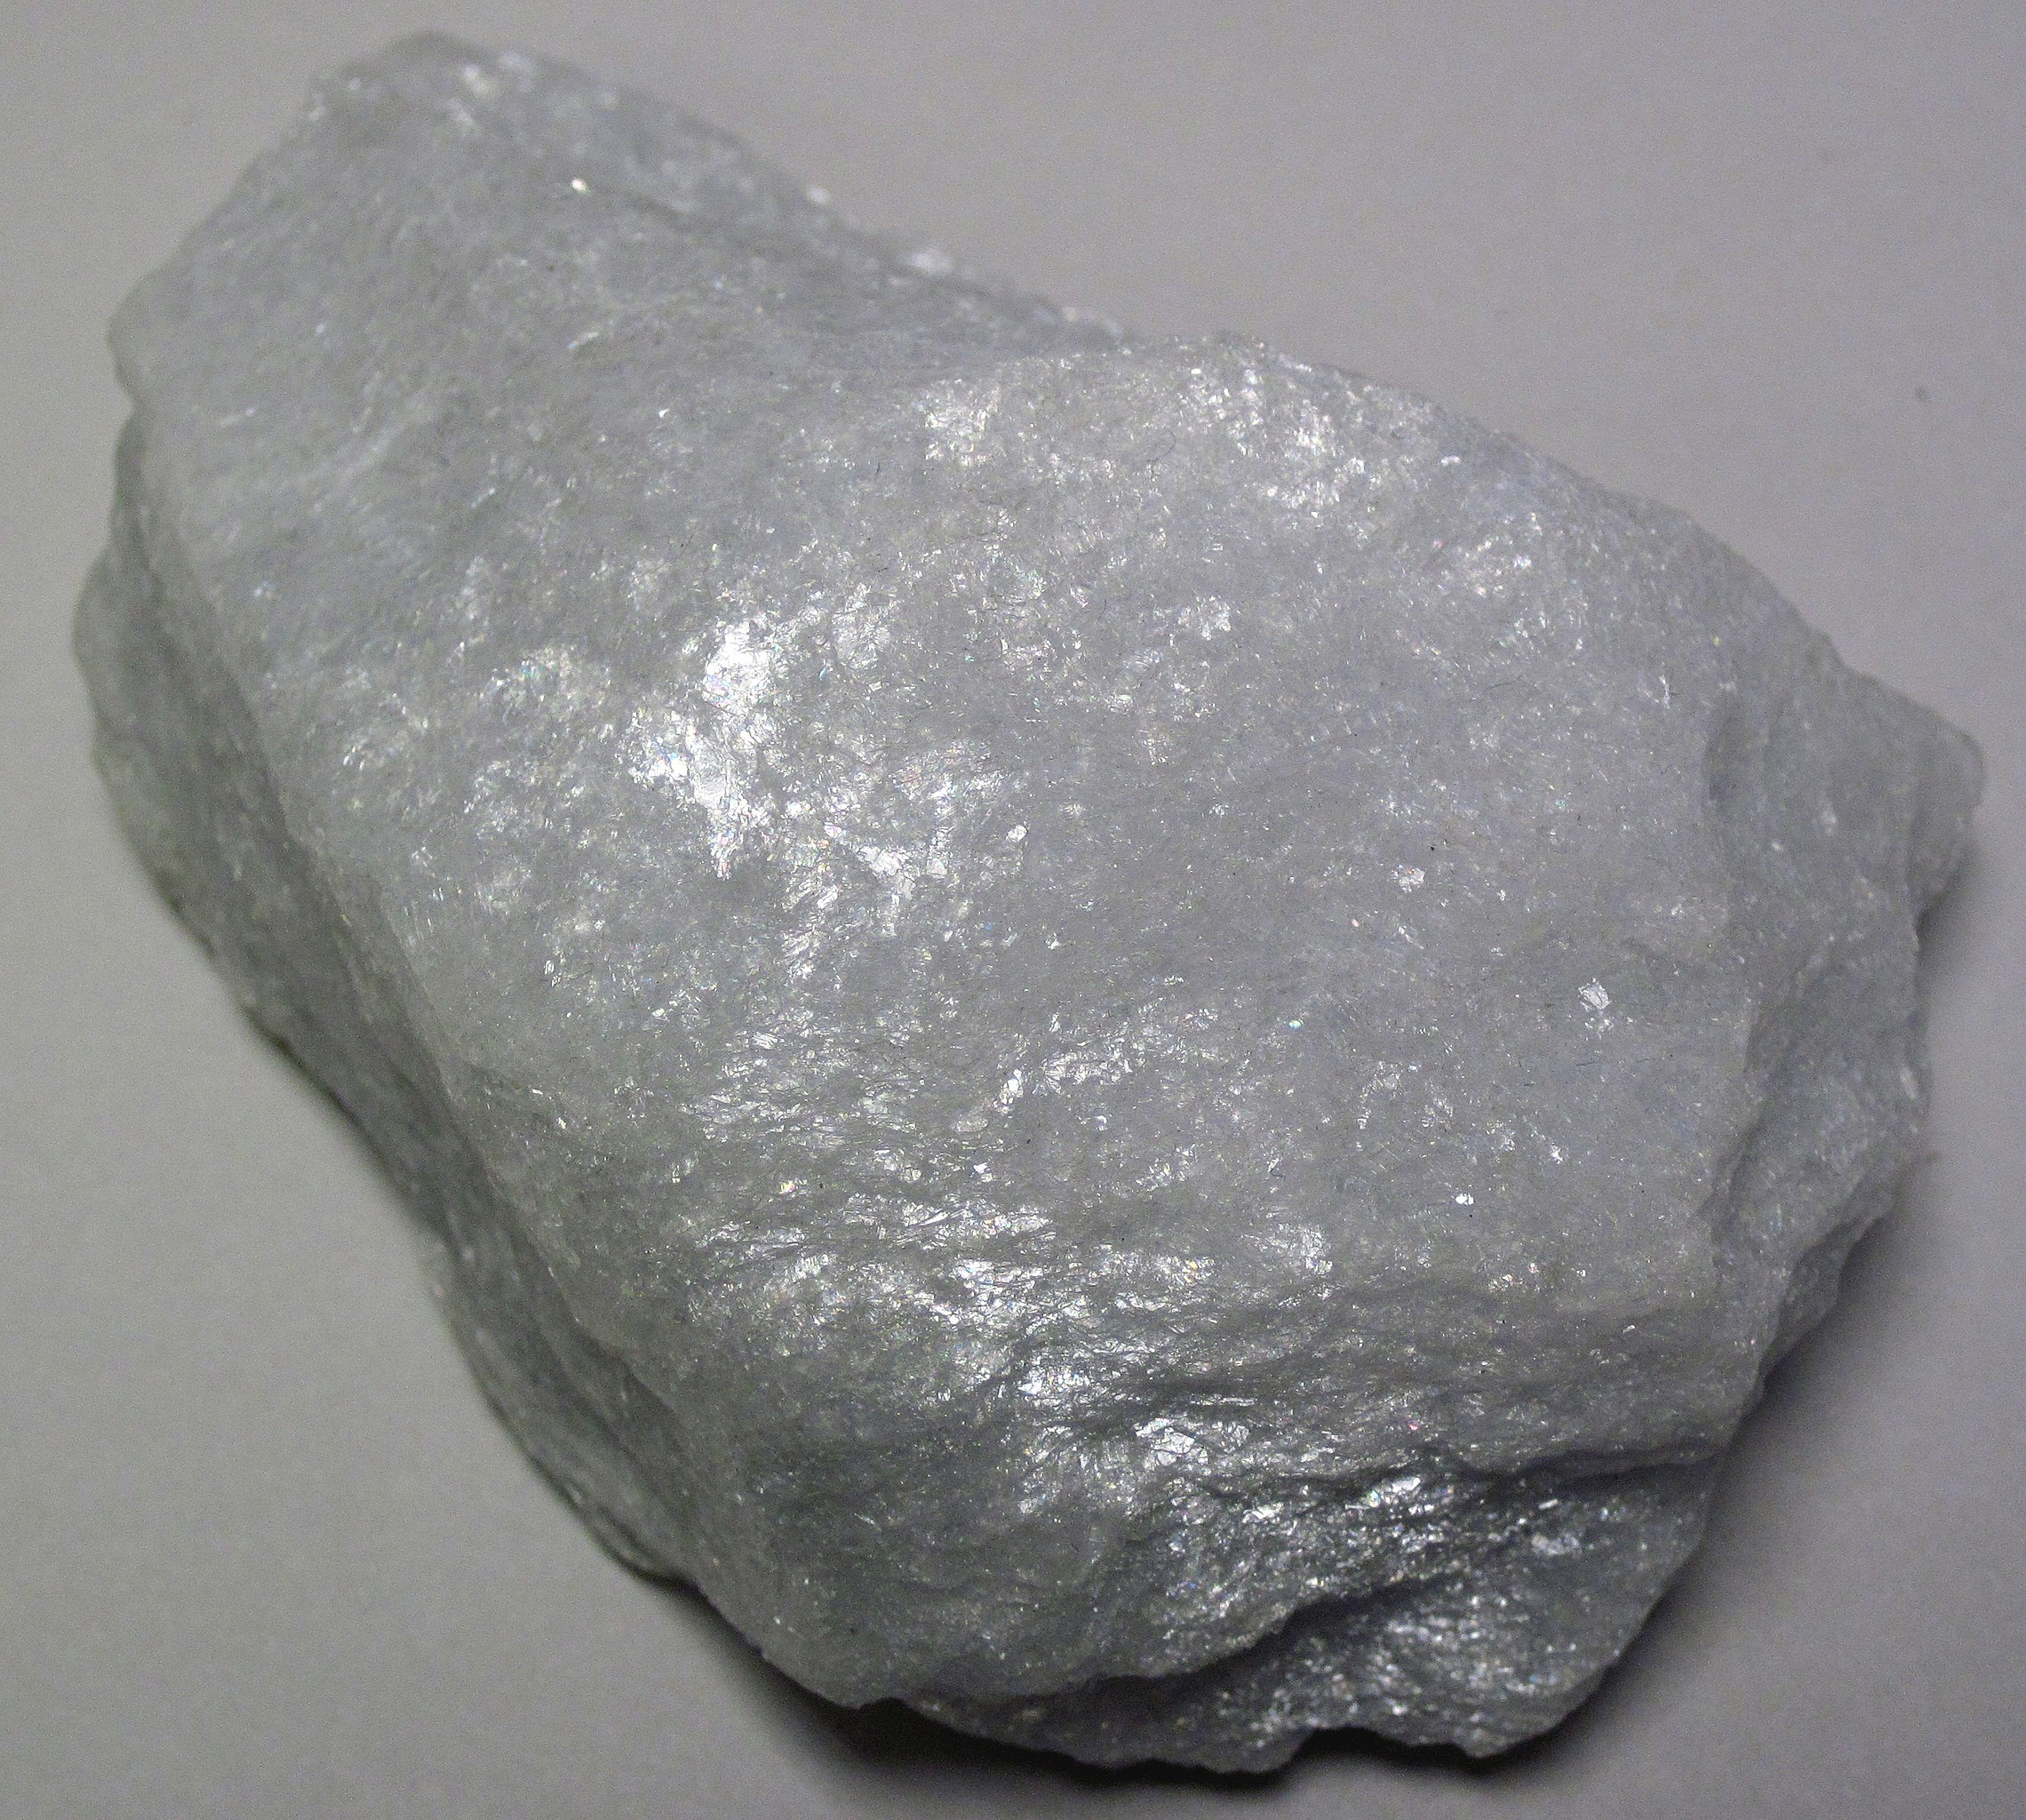 File:Rock anhydrite (Lockport Dolomite, Silurian; Penfield Quarry, Monroe County, western York State, USA) 2.jpg - Wikimedia Commons